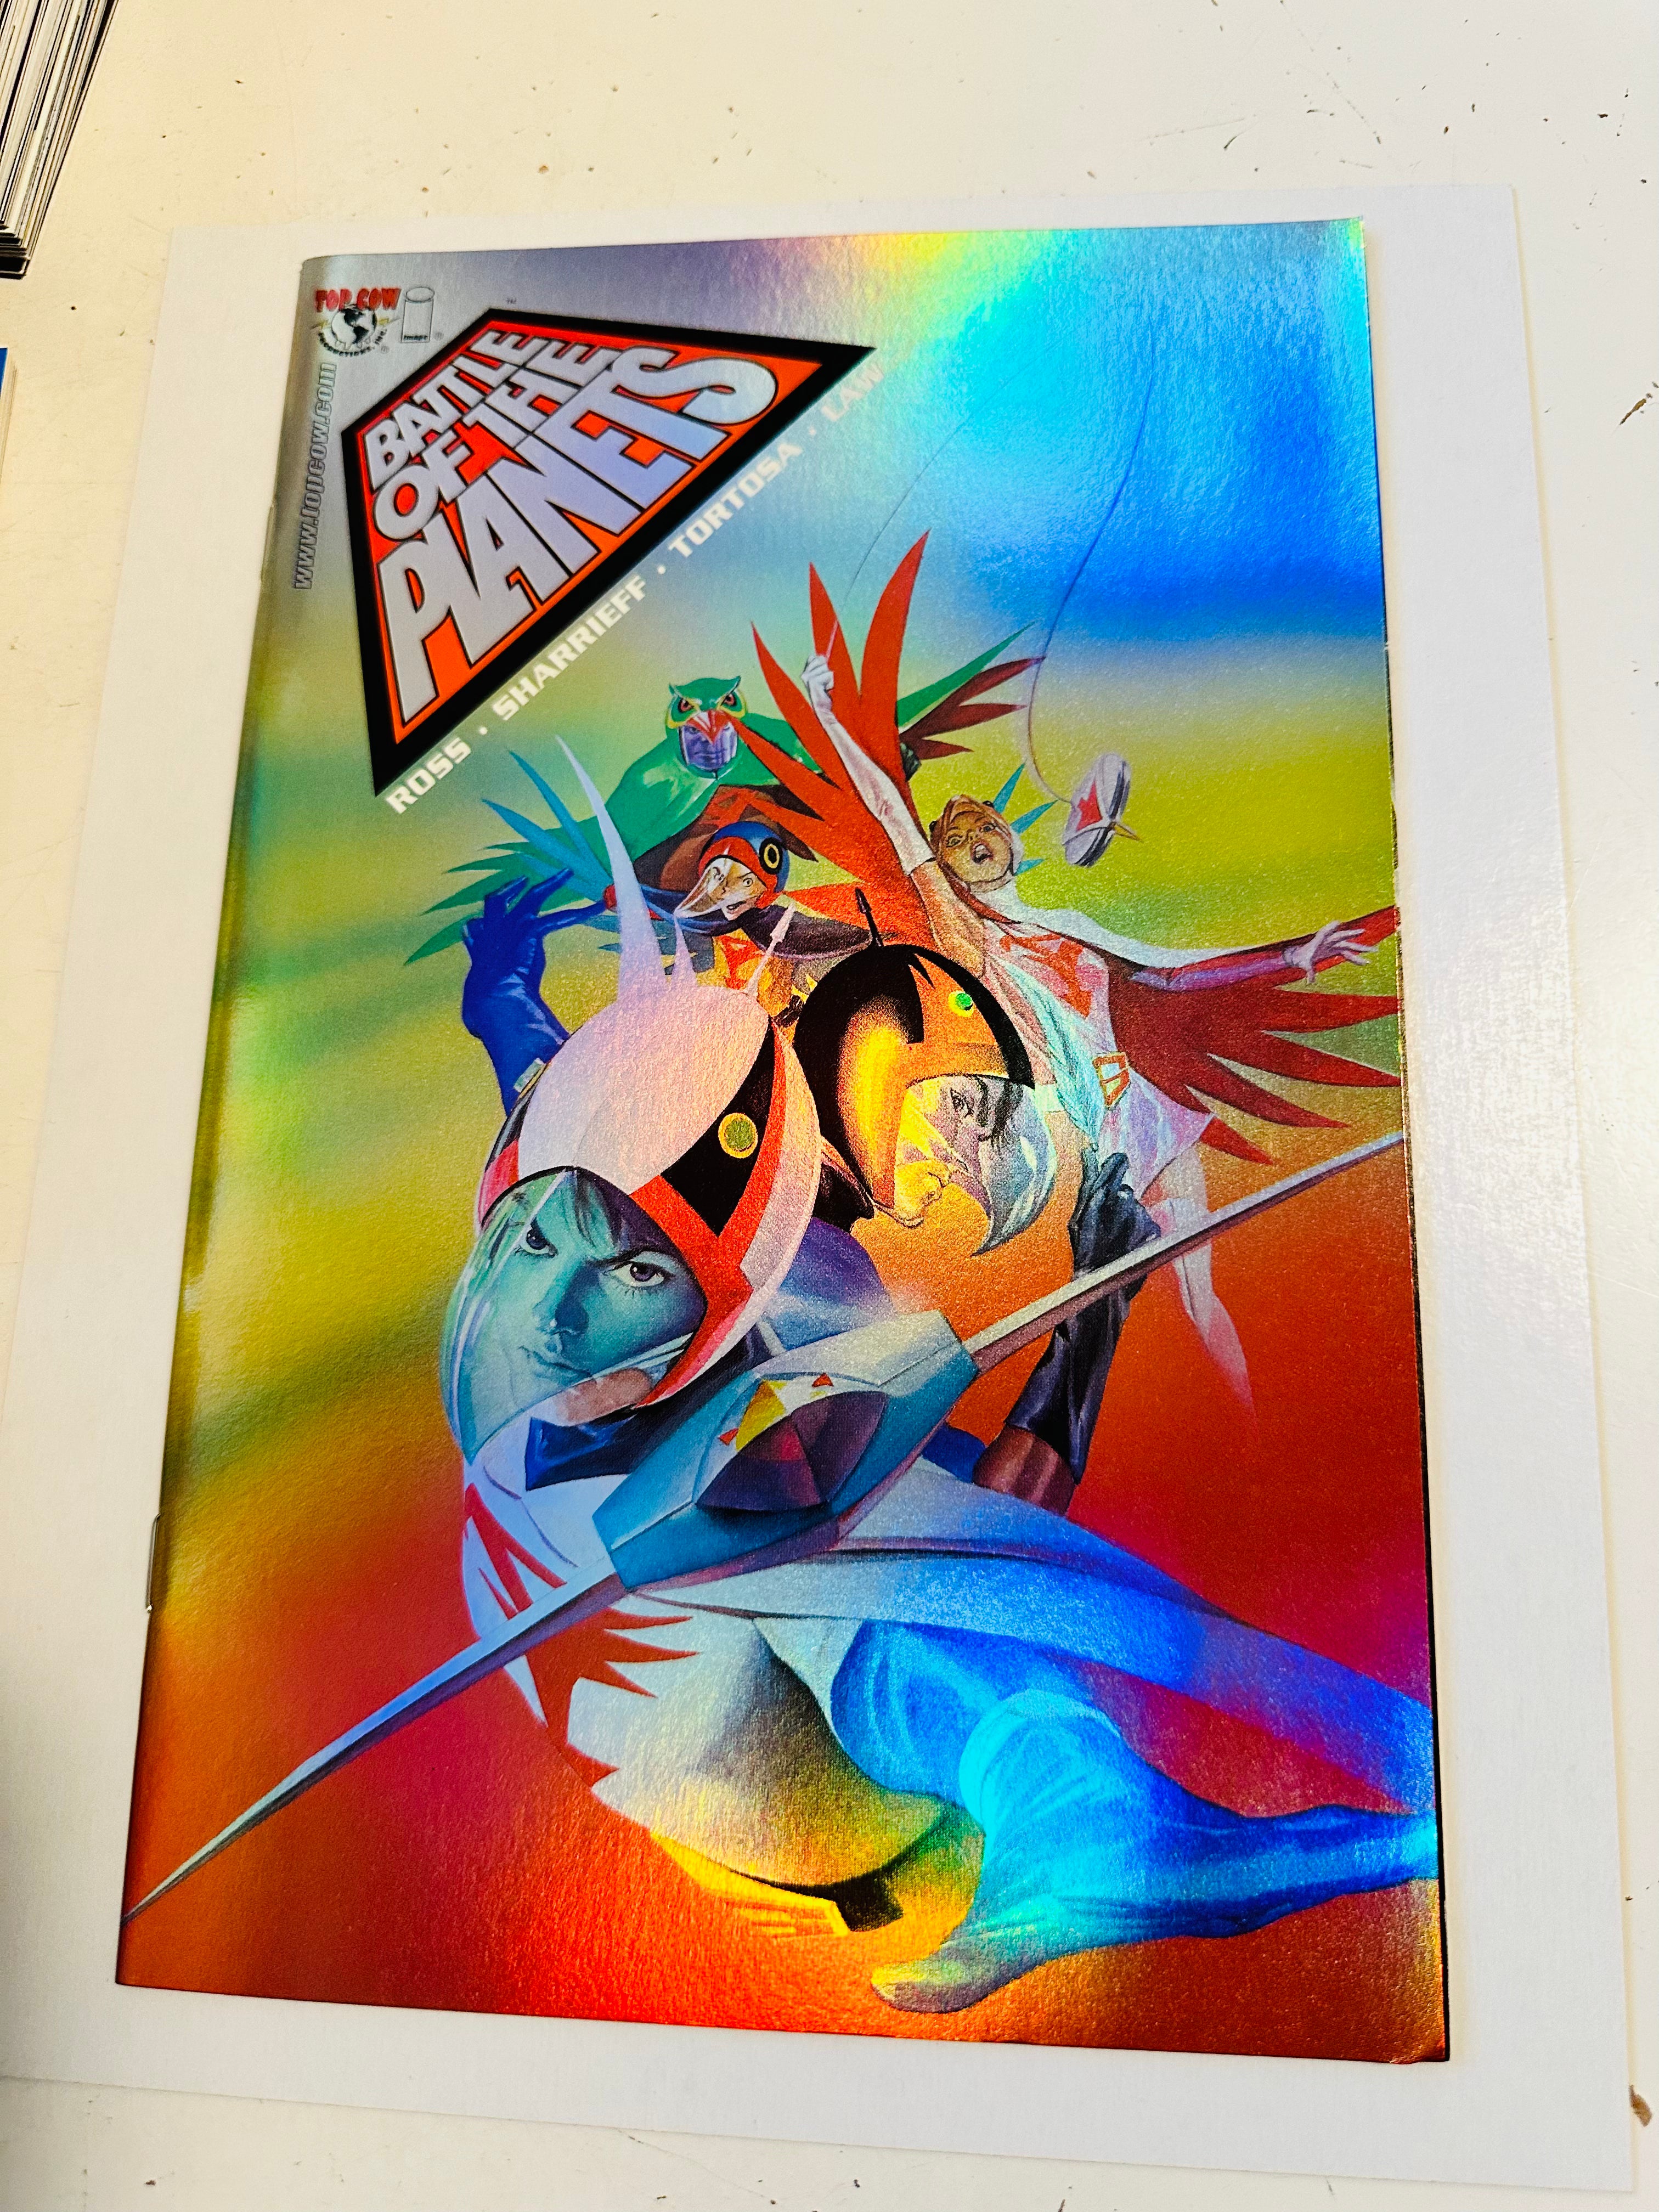 Battle of the planets, number one foil cover, book